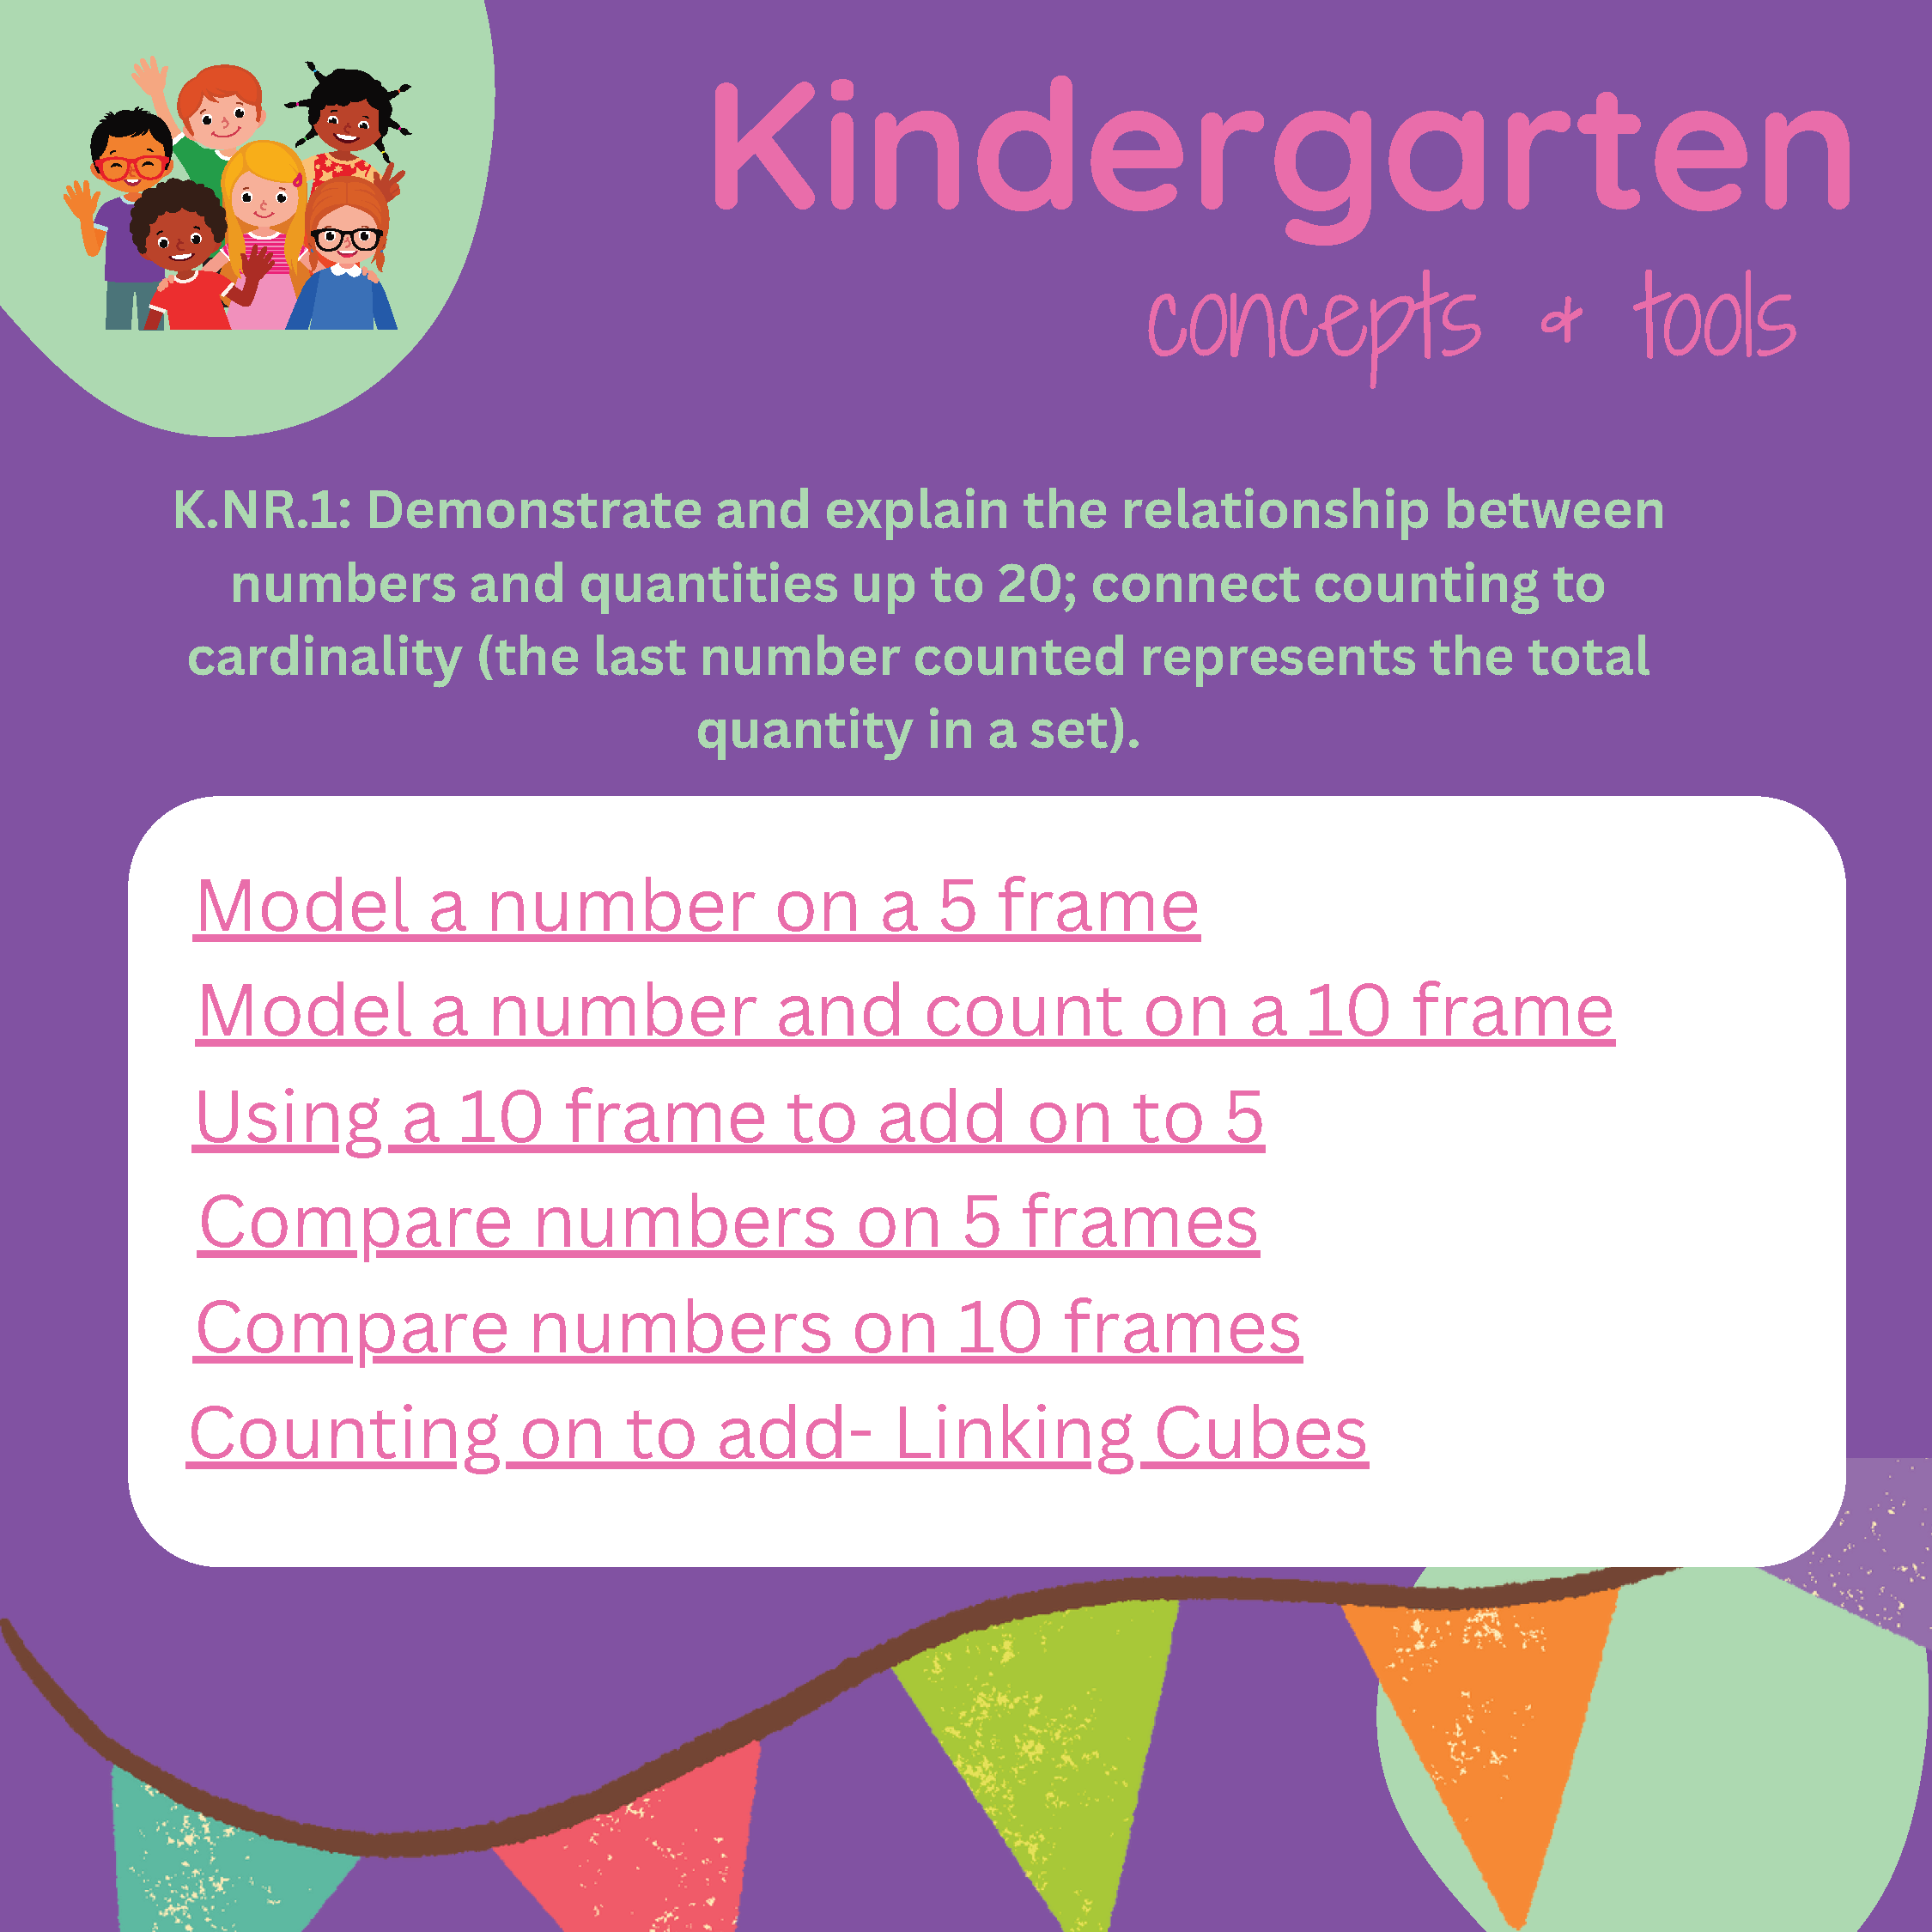 Kindergarten concepts and tools (002)_Page_1